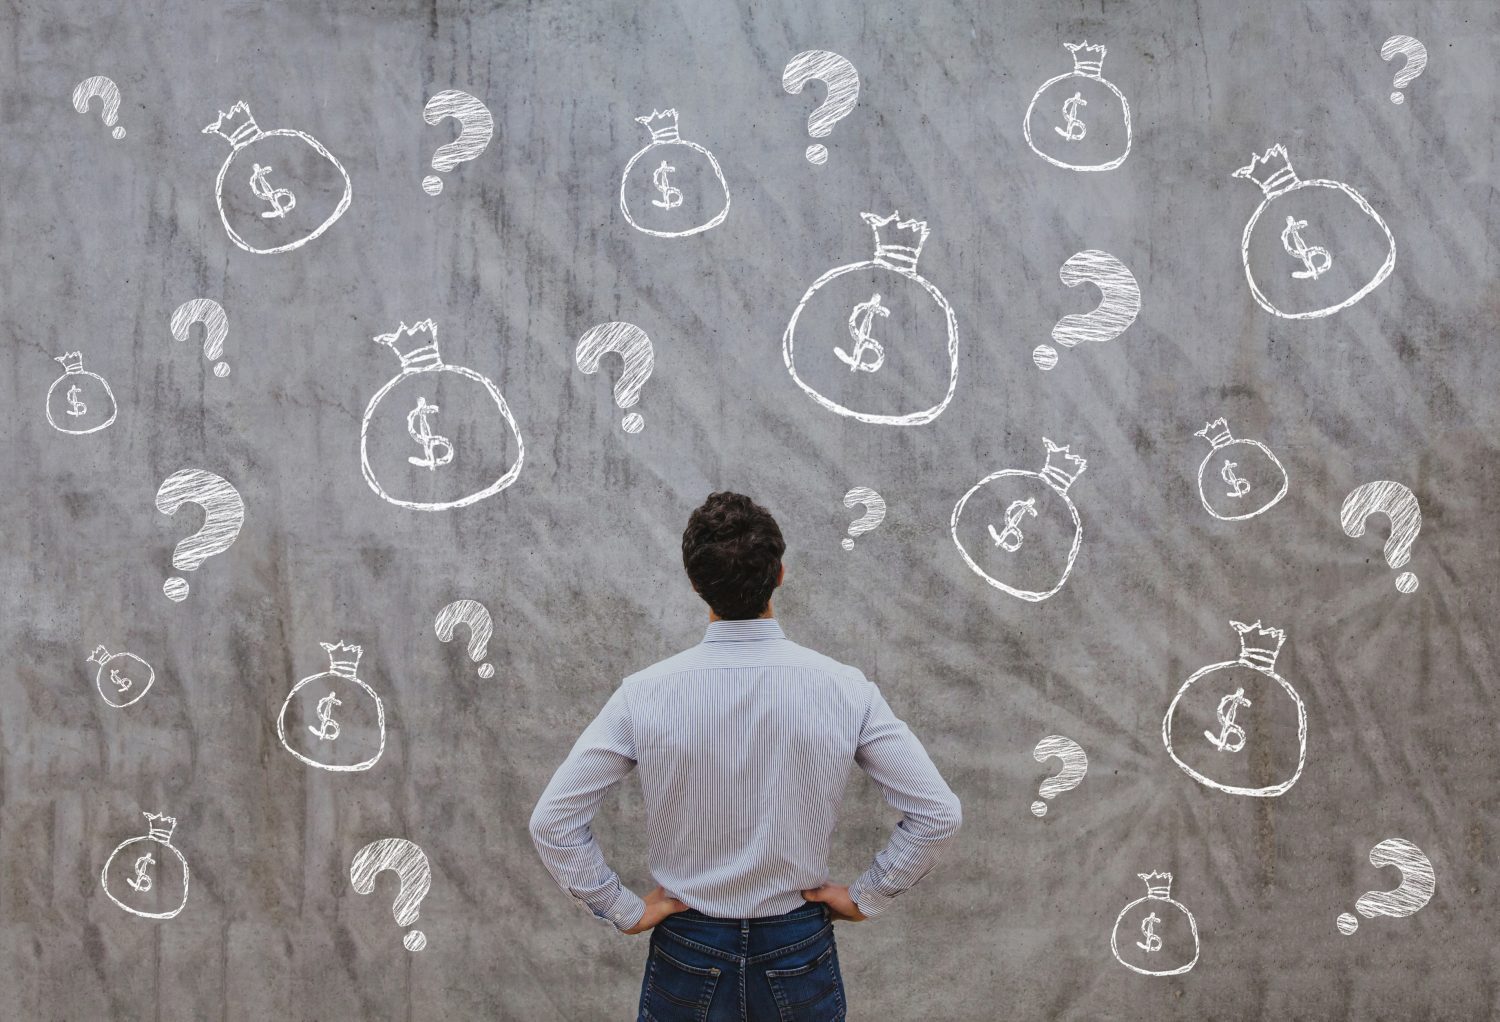 a man stands, hands on hips, staring at a wall painted with question marks and bags full of money